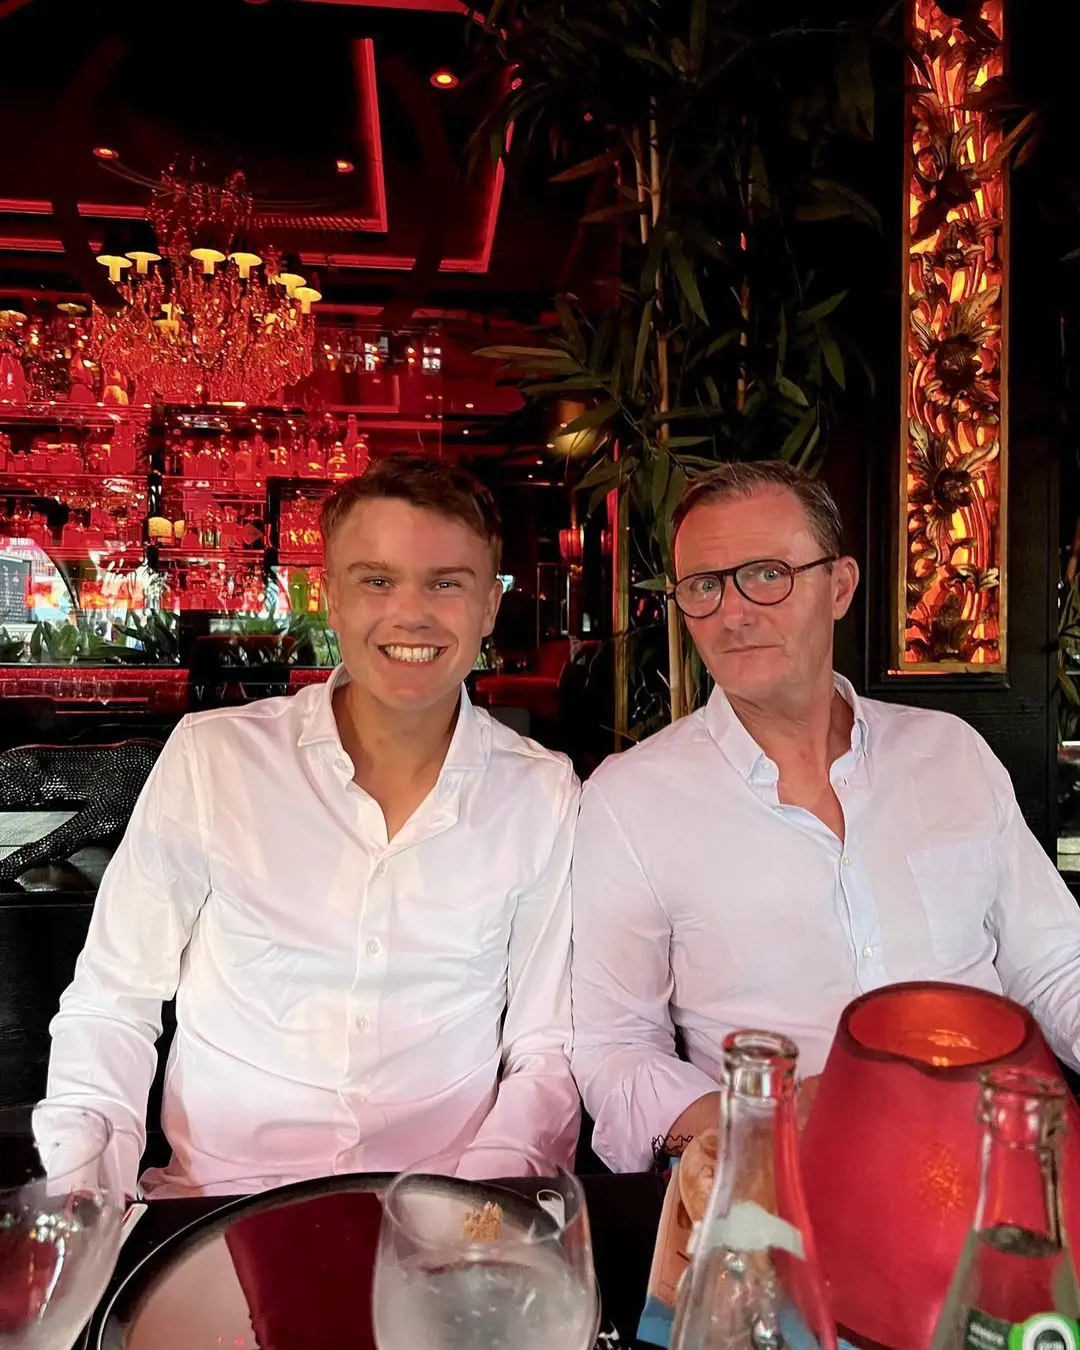 Holger and his dad pictured at a restaurant in Monte-Carlo, Monaco.